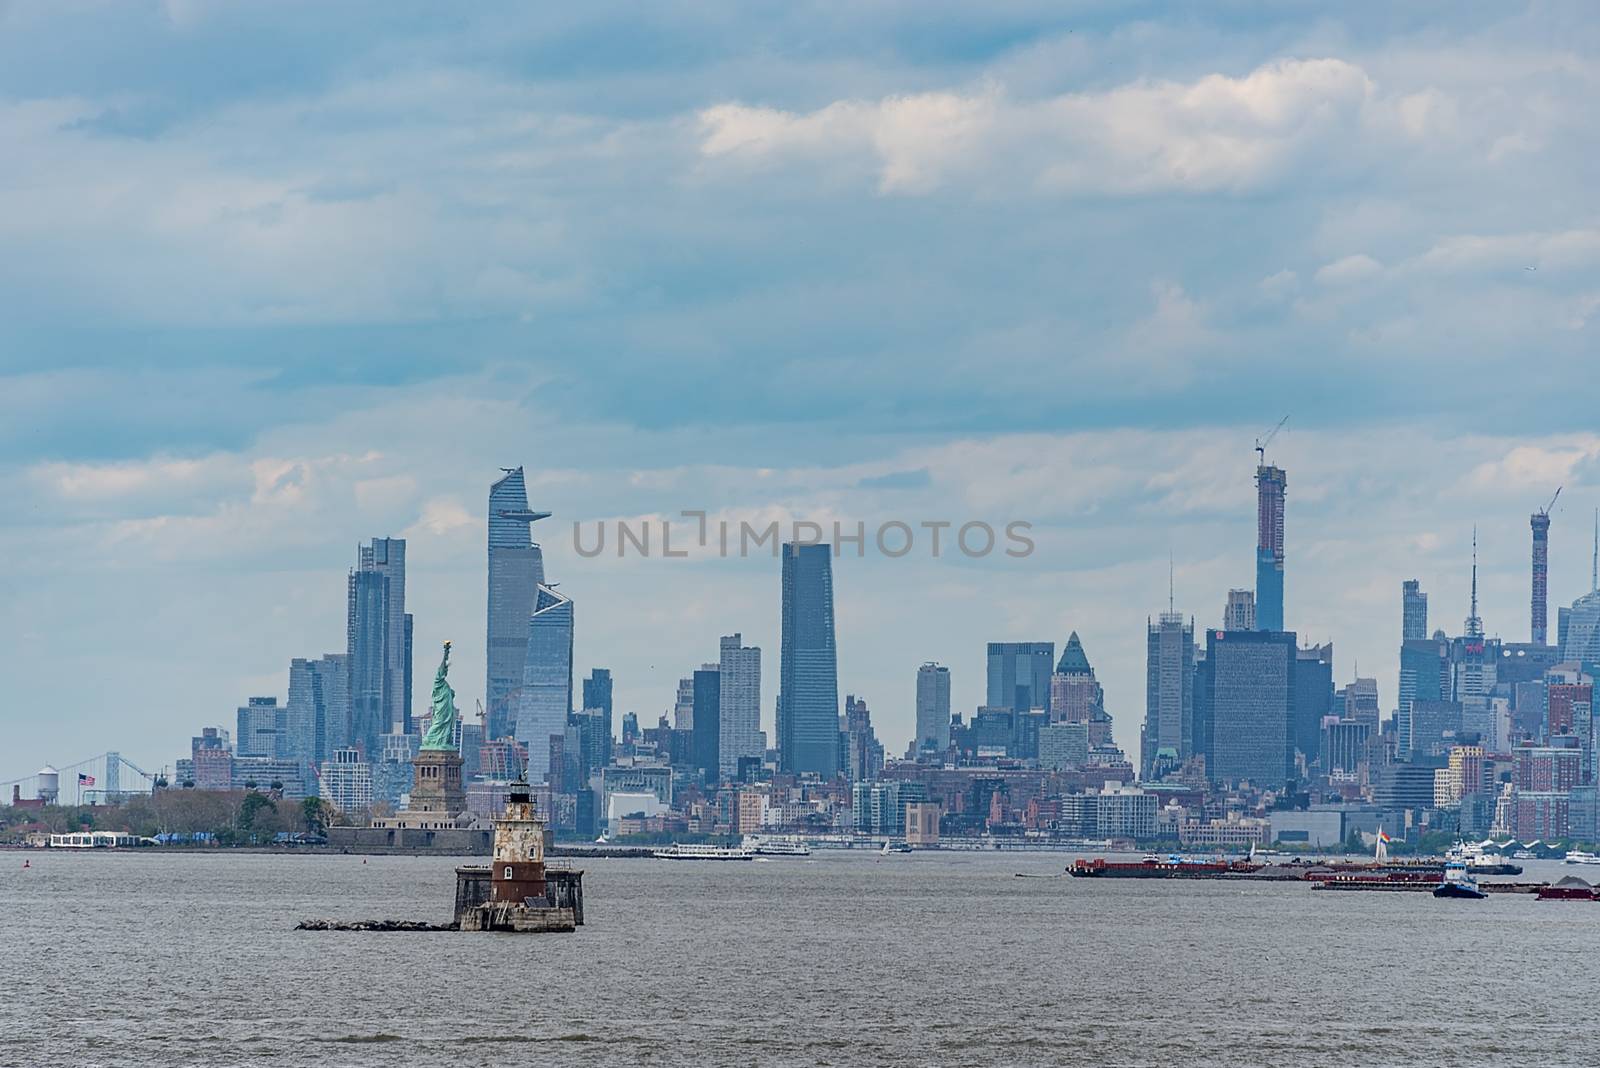 USA, New York, Staten Island - May 2019: New York and the Statue of Liberty